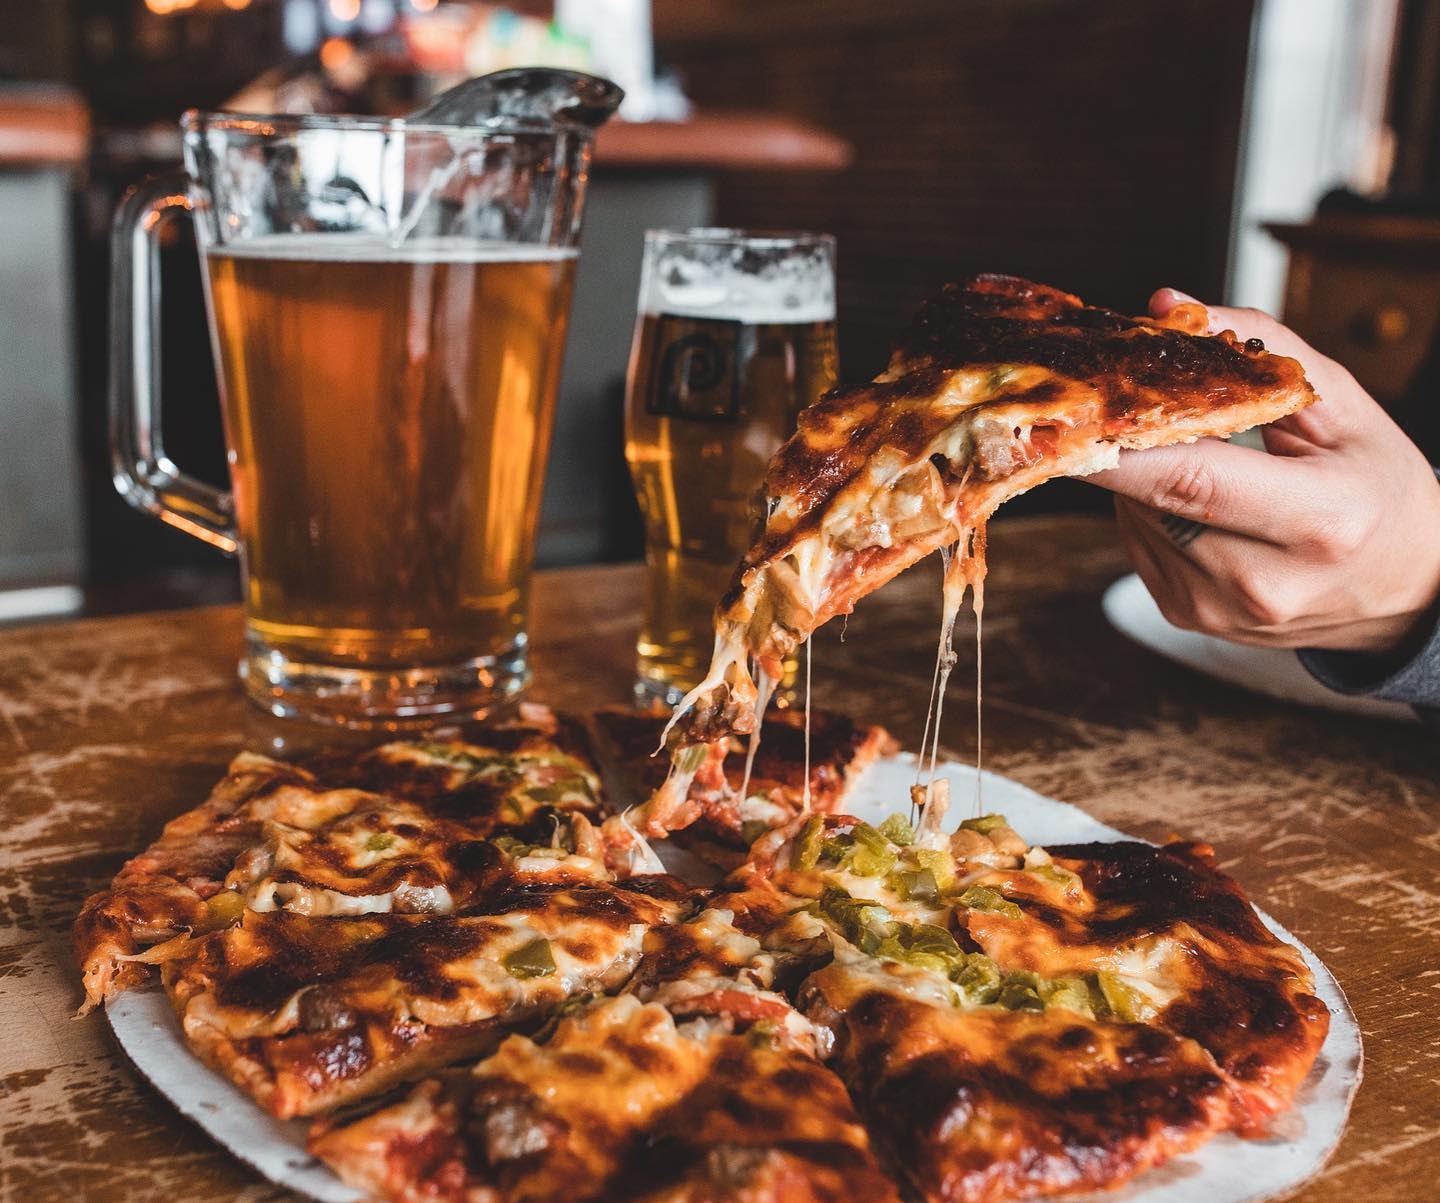 A pizza loaded with toppings on a table with a pitcher and a pint of beer.